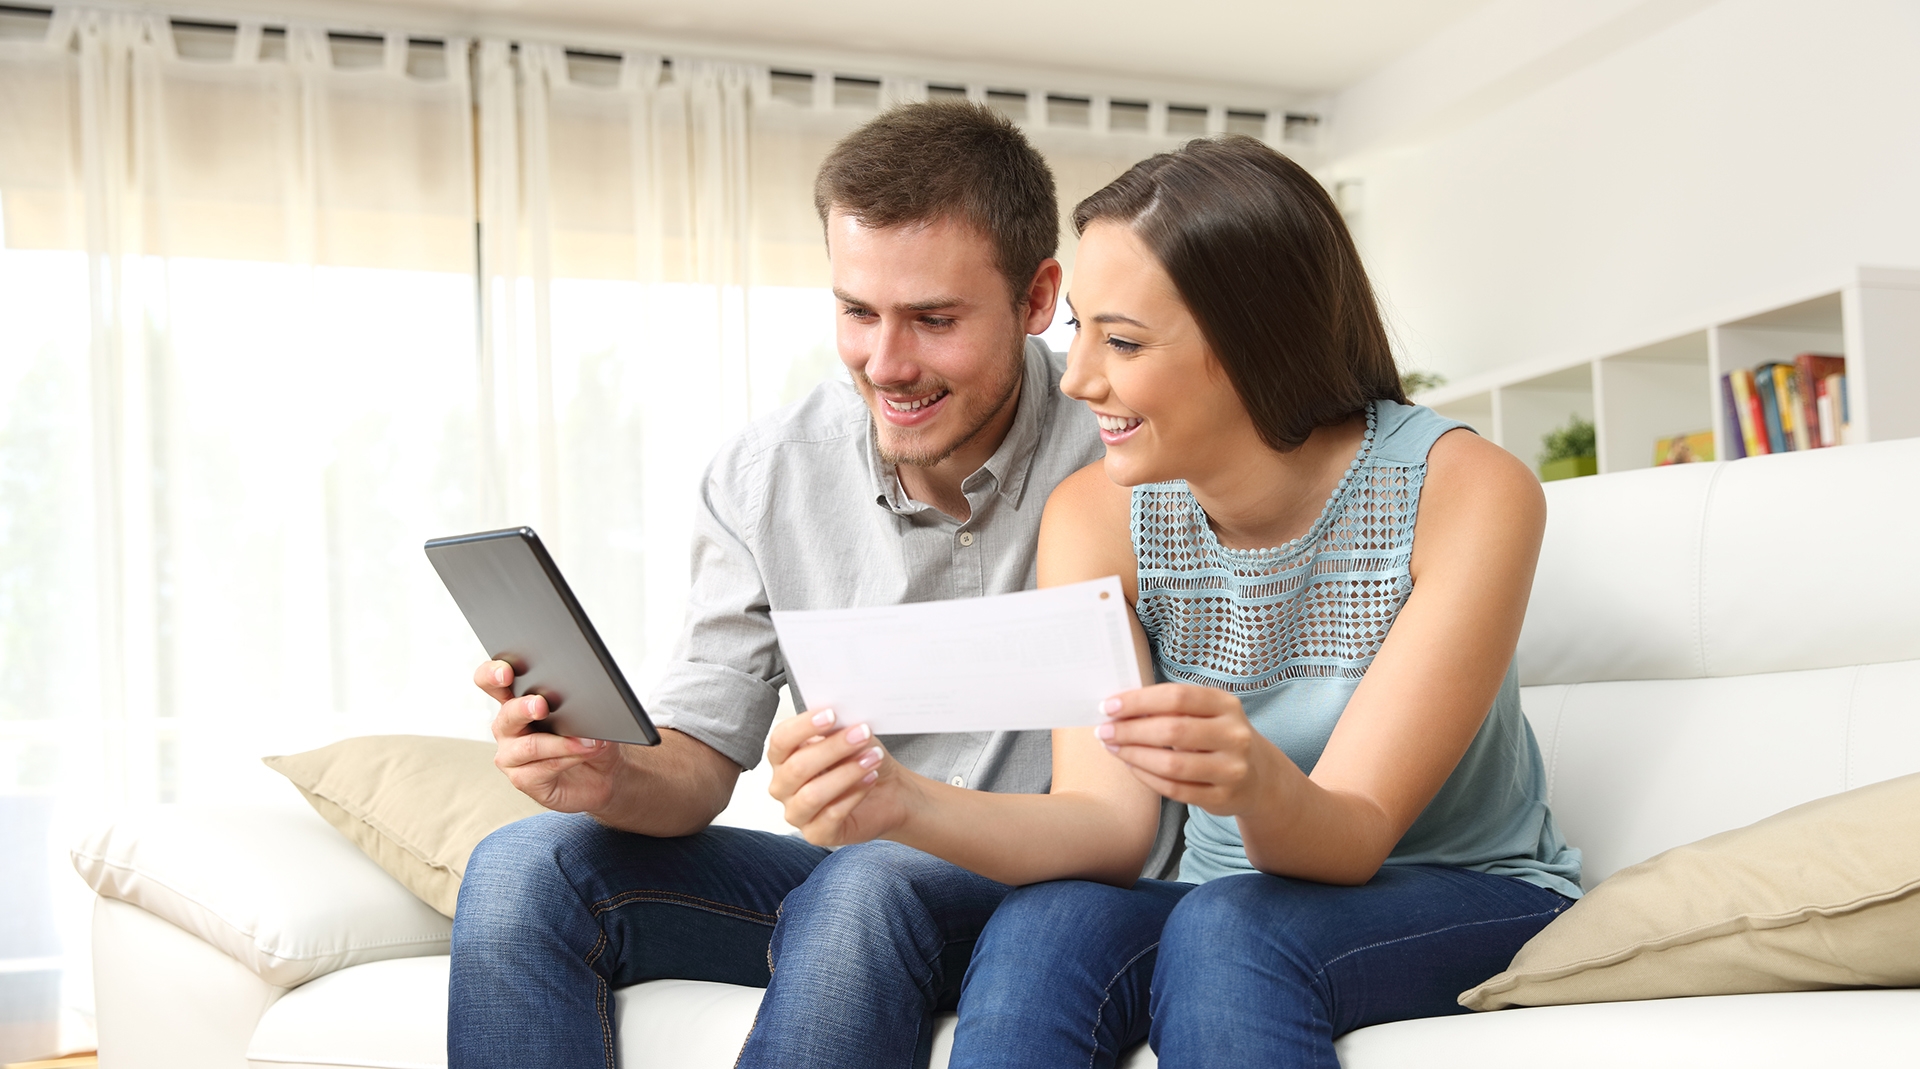 two people looking at a tablet on the couch